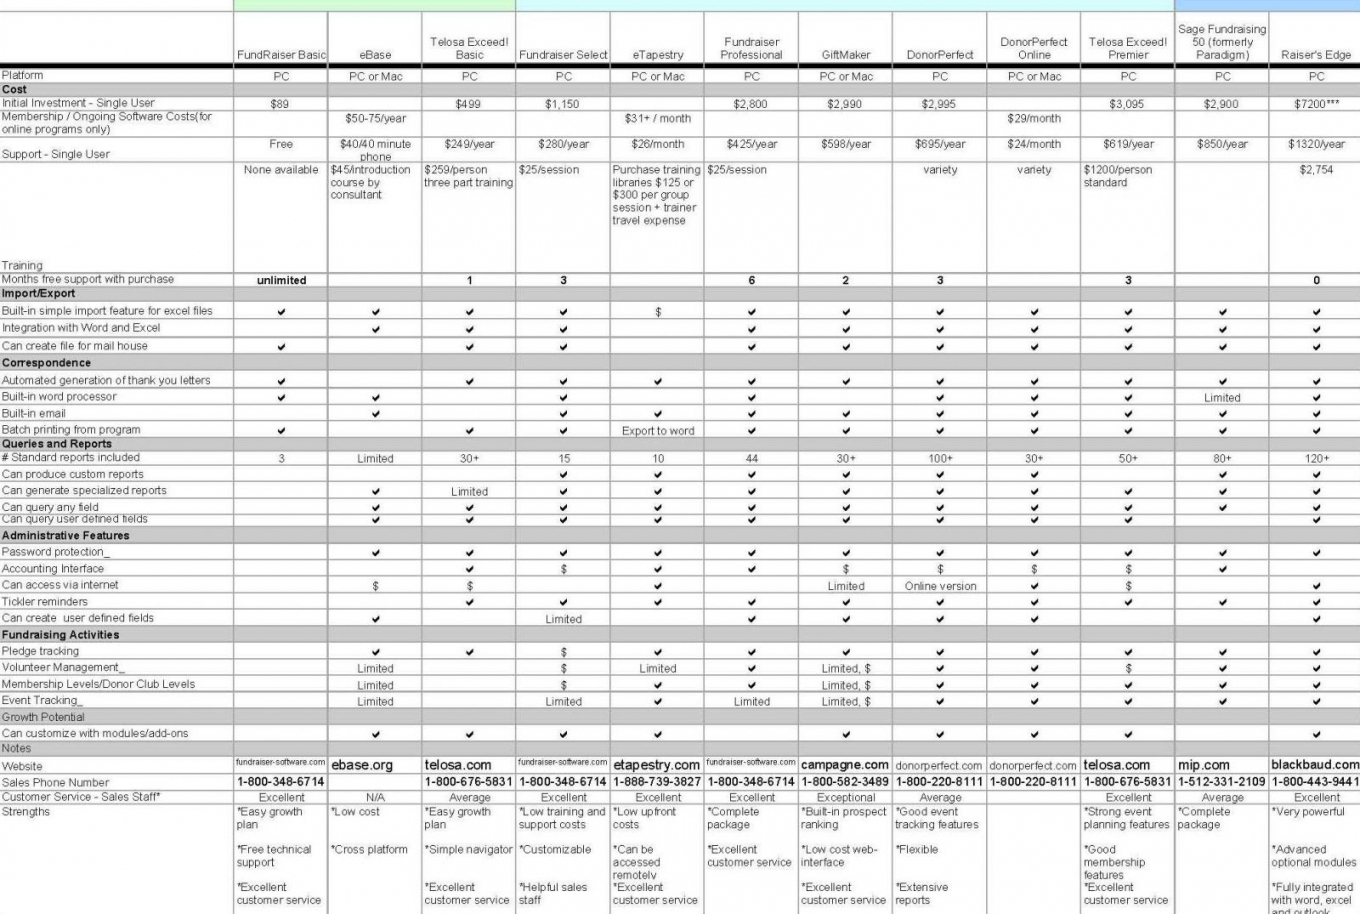 Grant Tracking Spreadsheet Template For Grant Tracking Spreadsheet Review Of Fundraisingonsultant And Writer